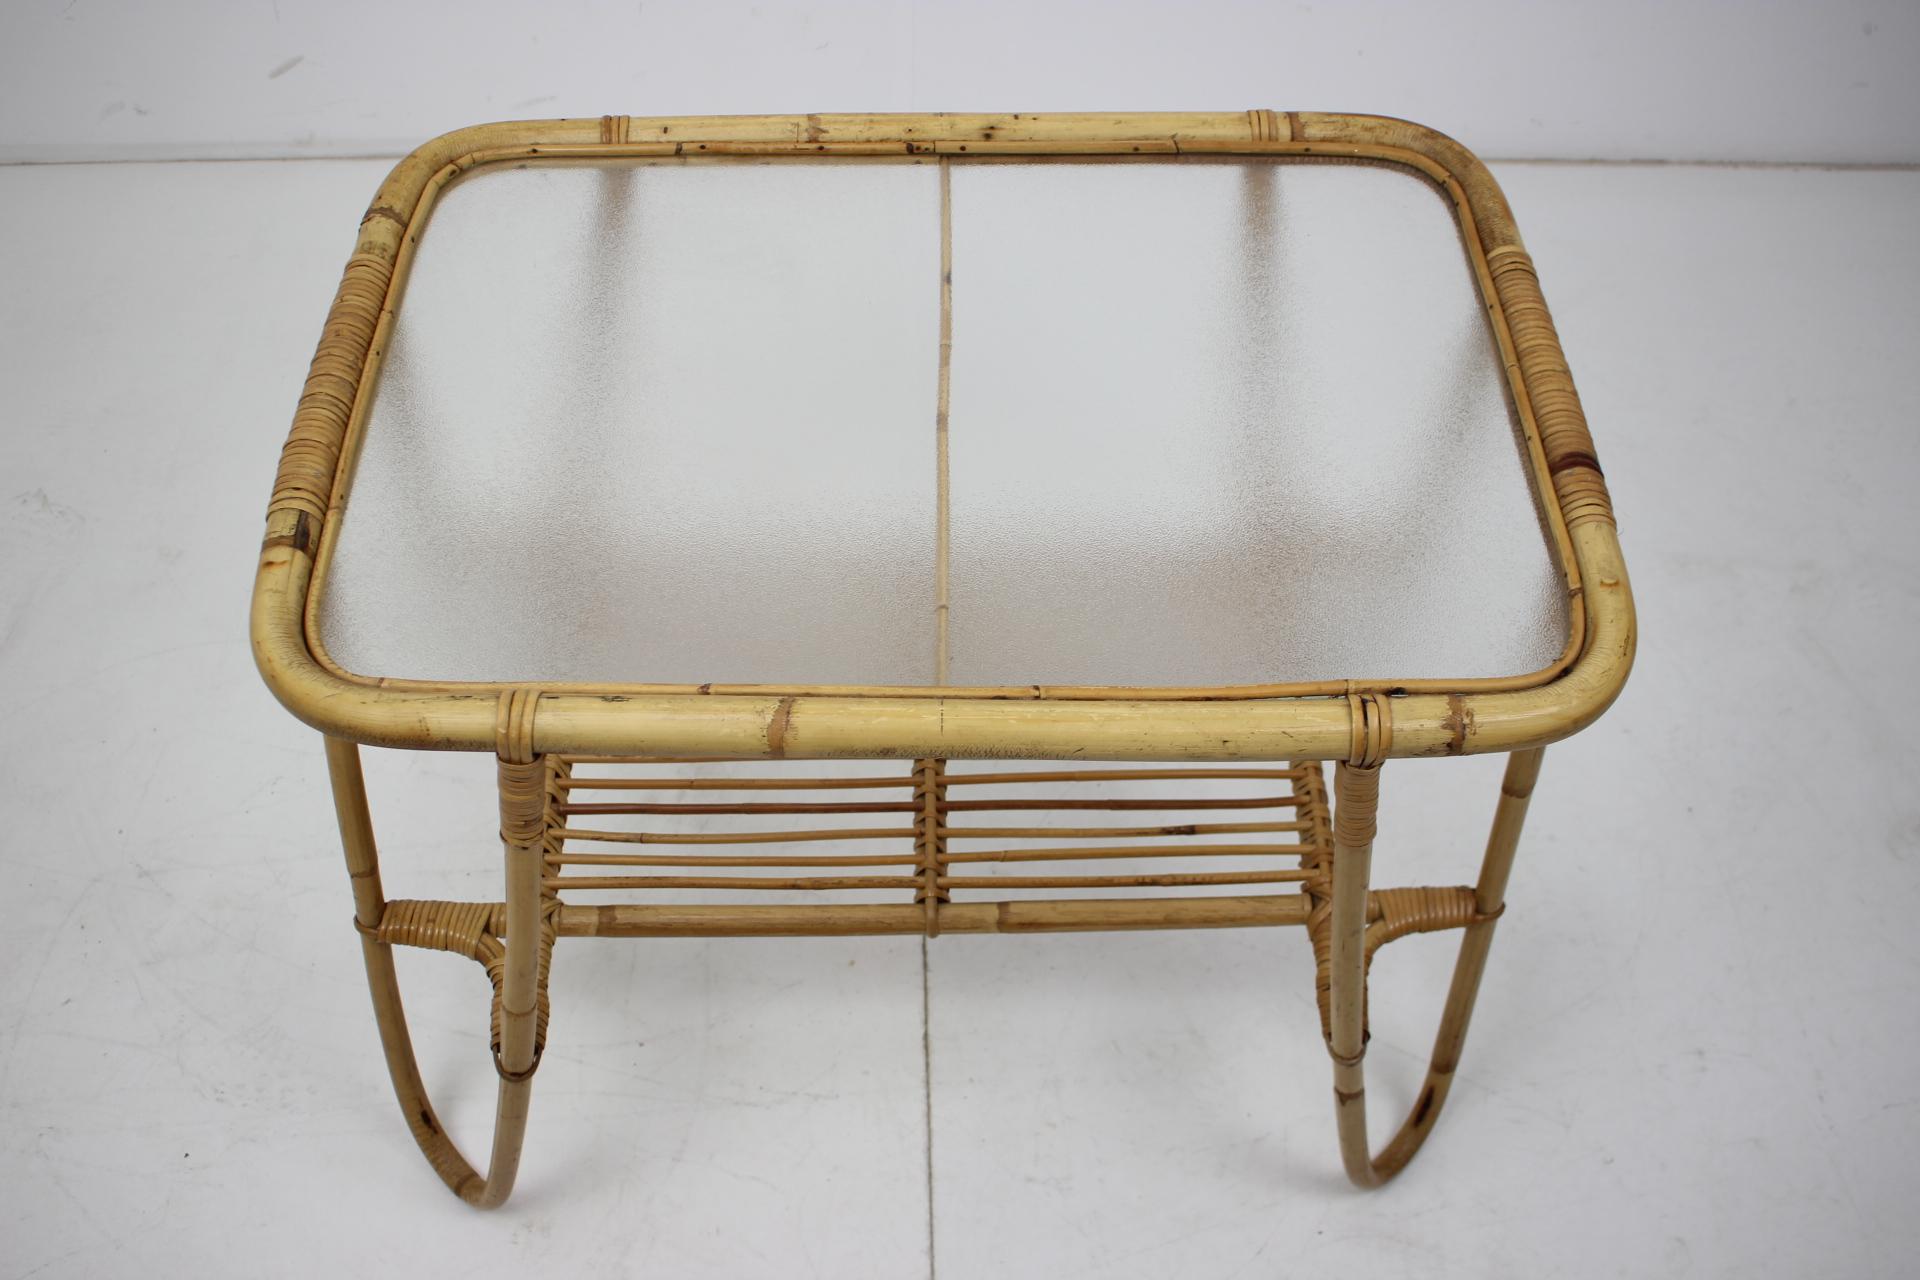 - made in Czechoslovakia
- made of rattan
- good, original condition.
    